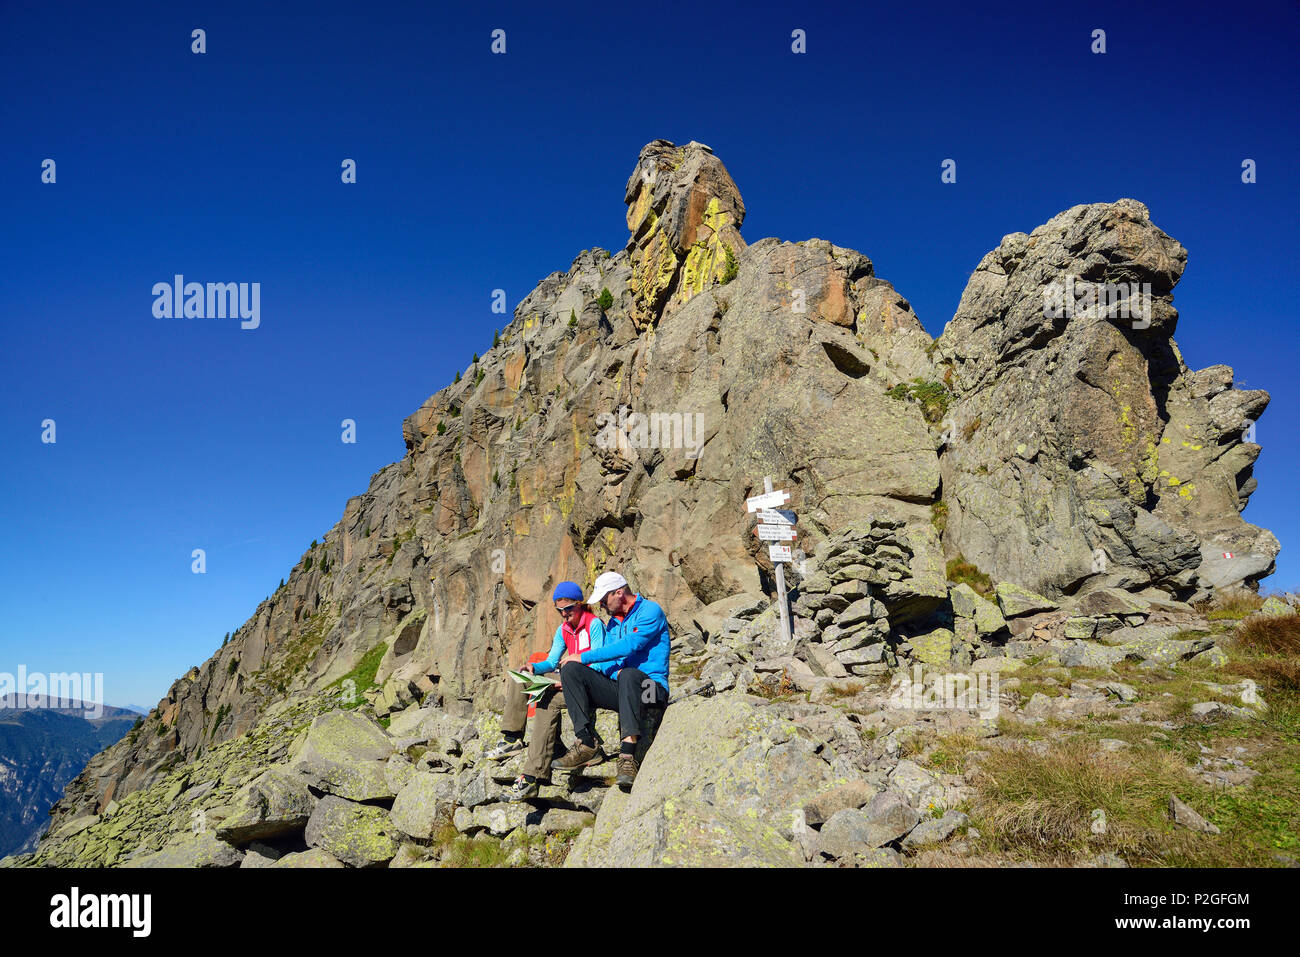 Two hikers sitting beneath a rock spire and looking at a map, Trans-Lagorai, Lagorai range, Dolomites, UNESCO World Heritage Sit Stock Photo